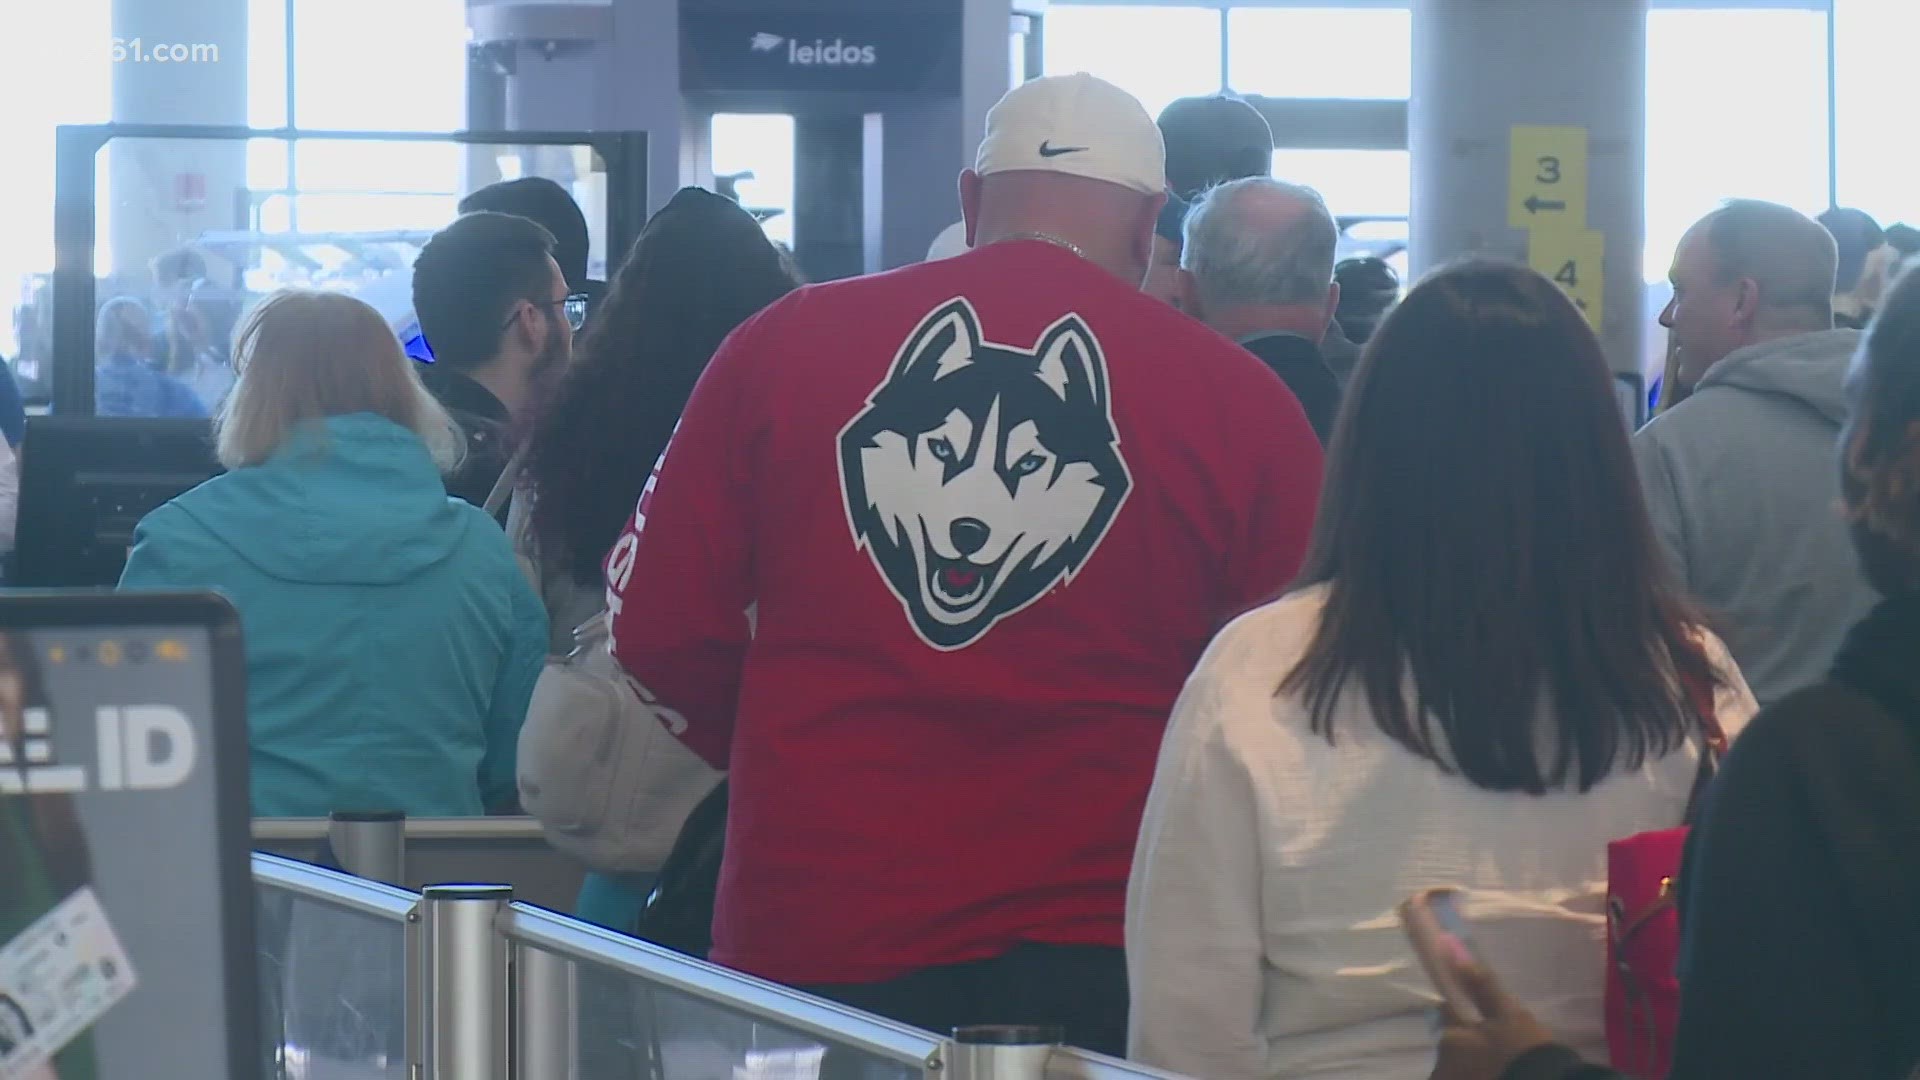 Husky faithful are hoping to watch the men's basketball team in person win their 5th National Championship in program history.